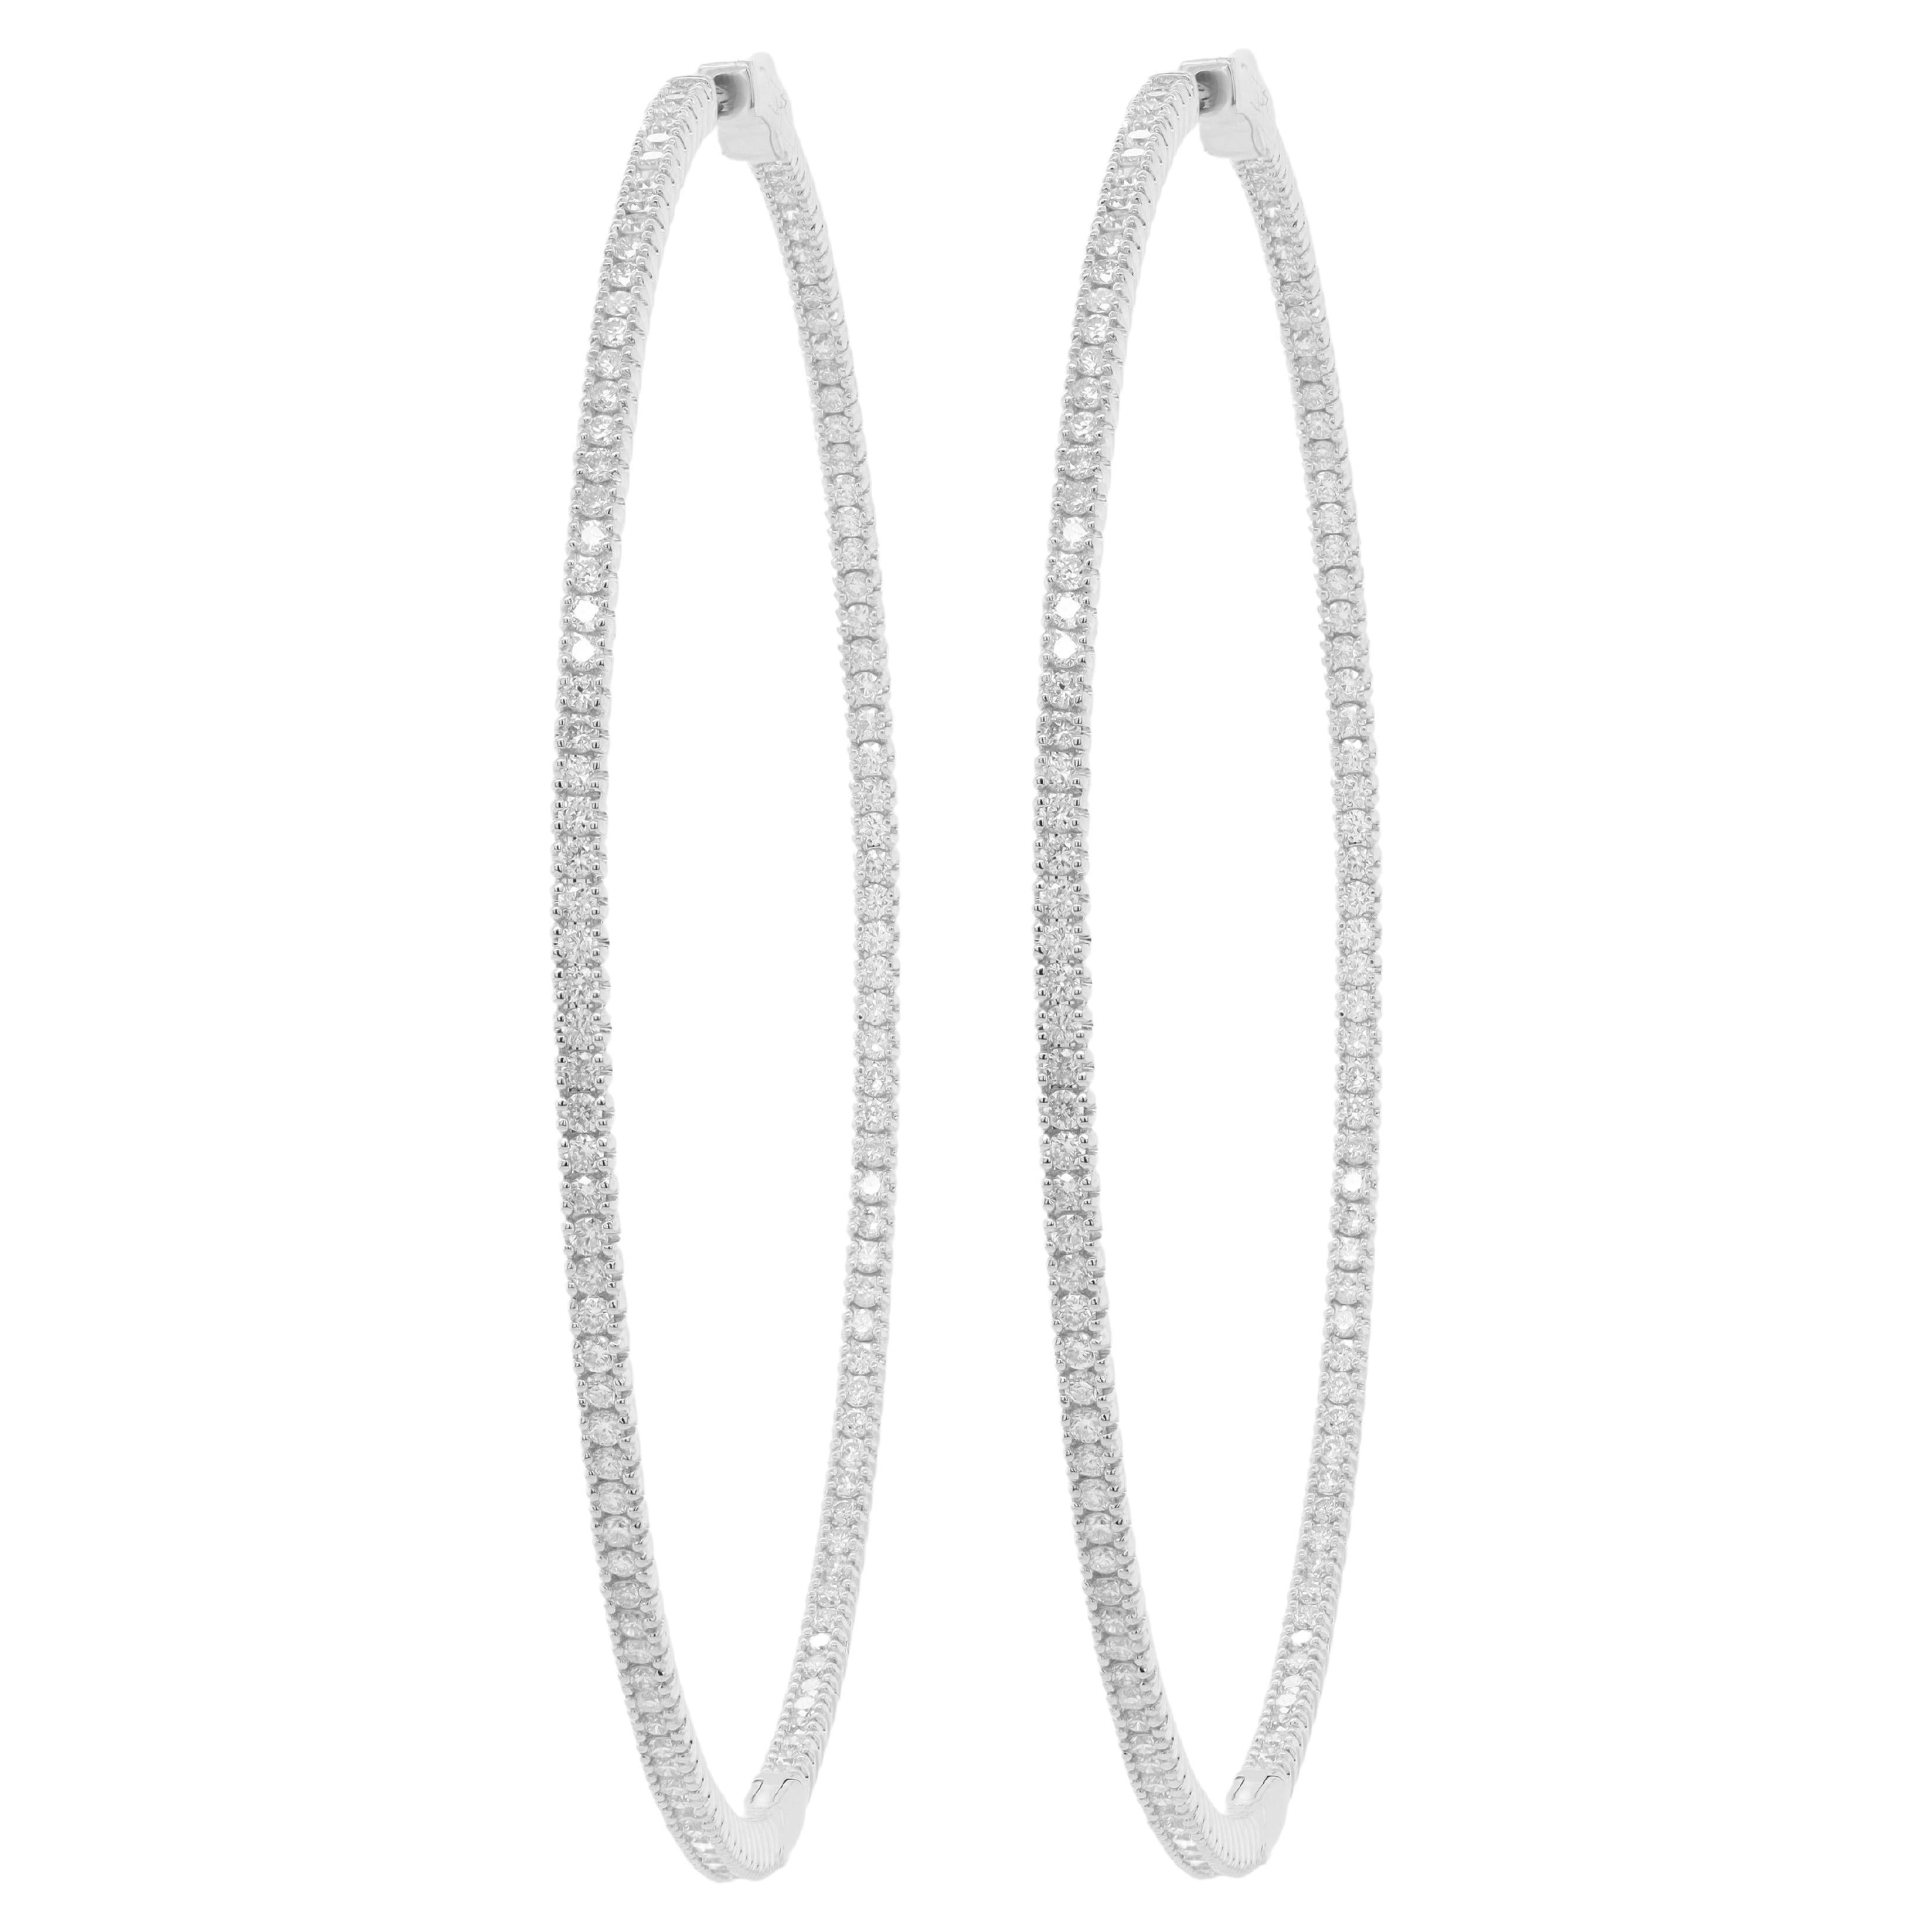 Diana M. 14kt white gold, 1.75" hoop earrings featuring 1.30cts  round diamond For Sale